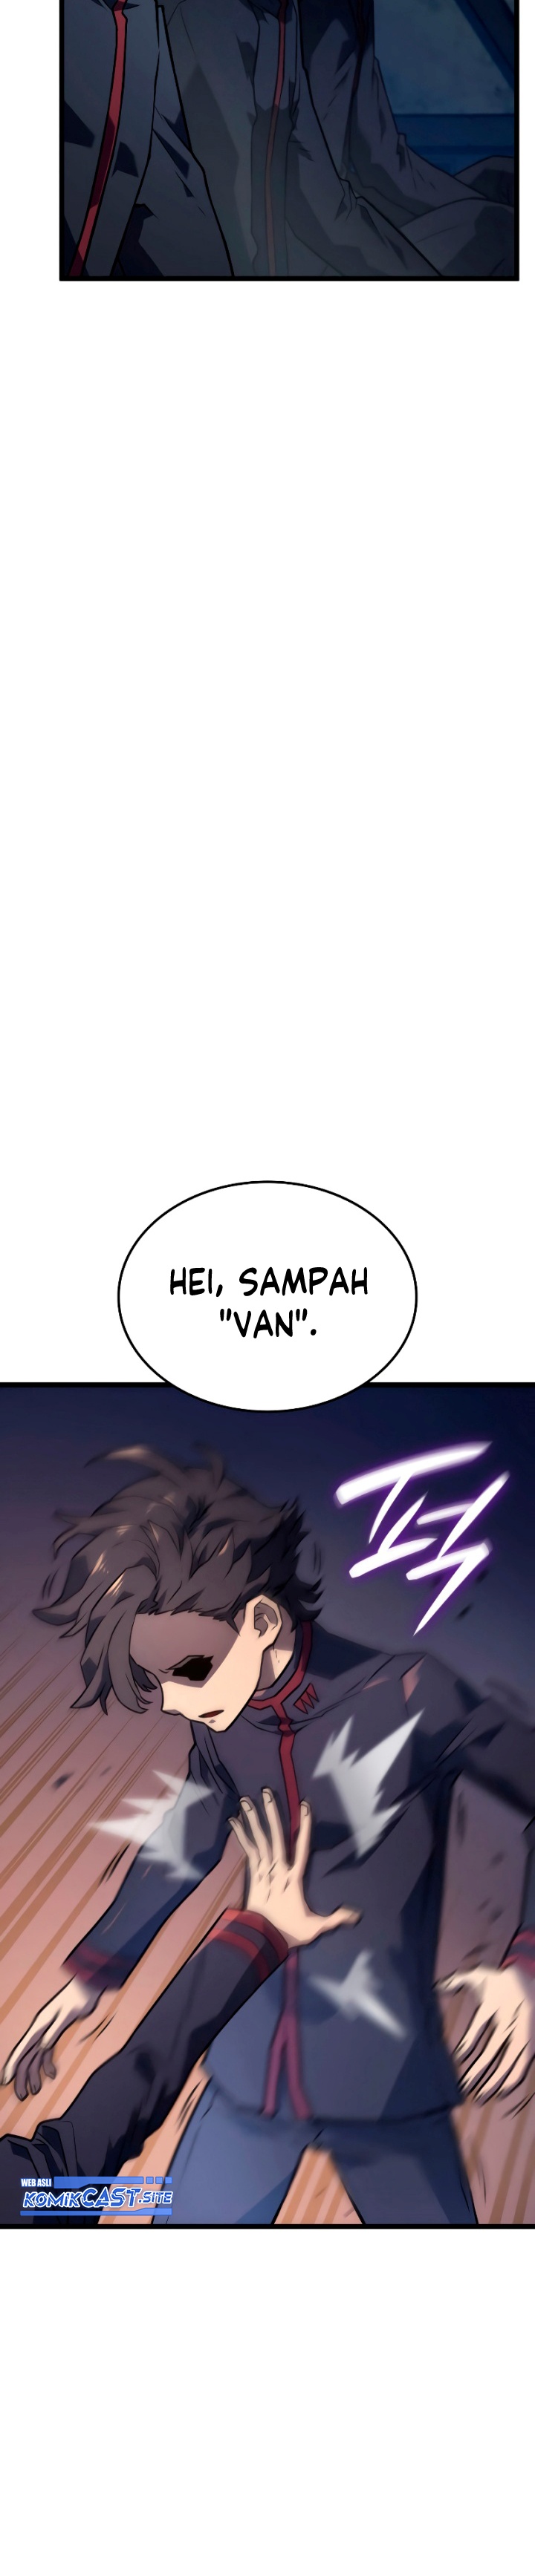 Revenge Of The Iron-Blooded Sword Hound Chapter 02 - 307